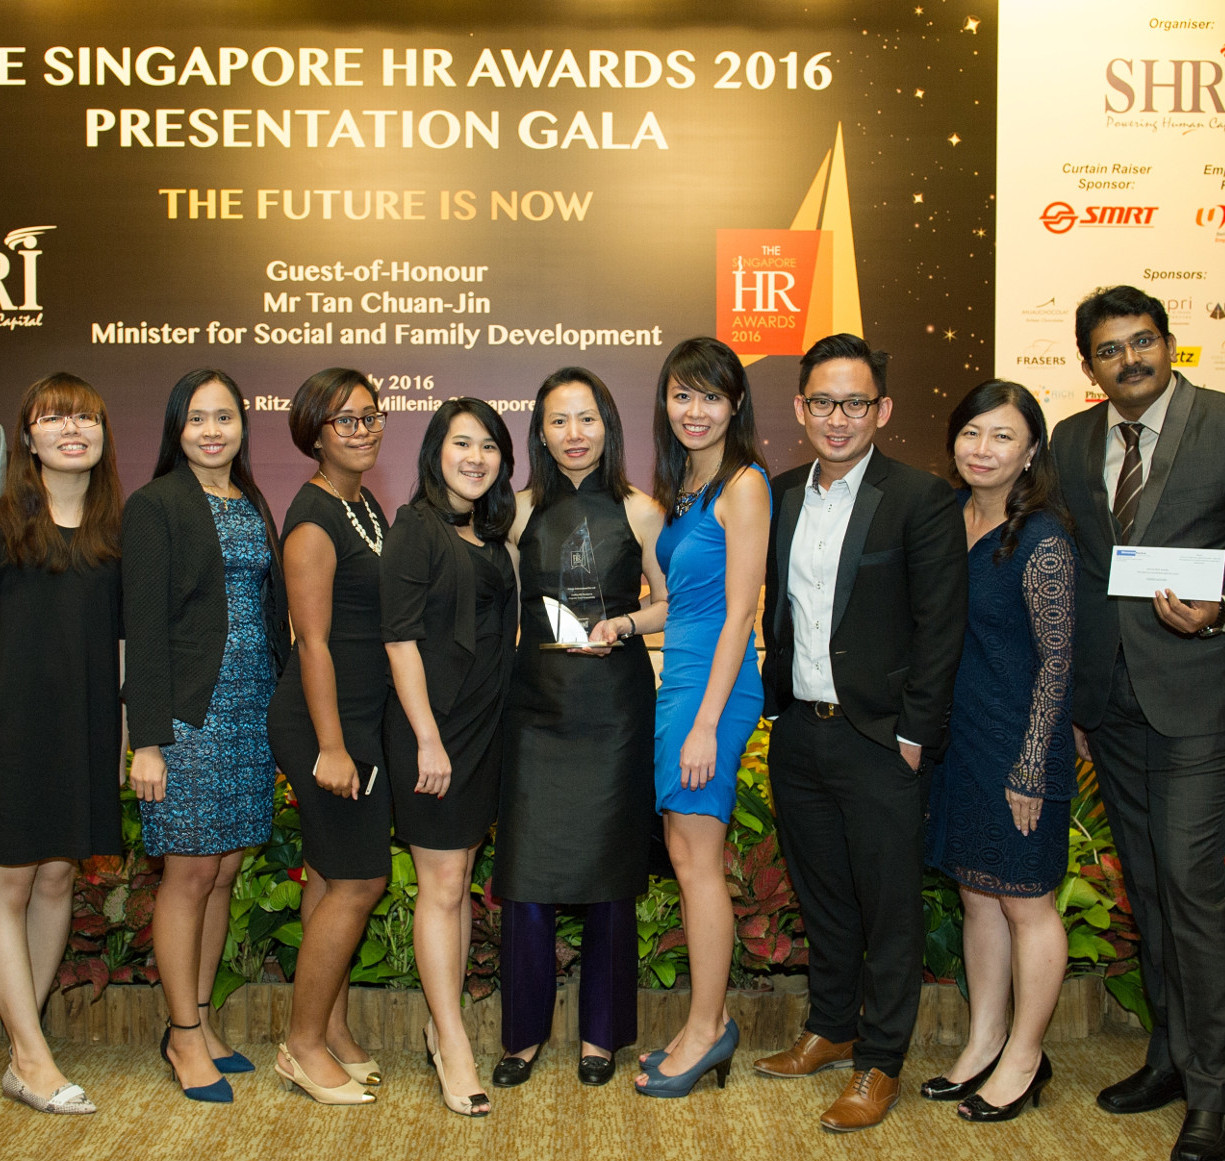 Sciente International receives an Award – Leading HR Practices for Corporate Social Responsibility